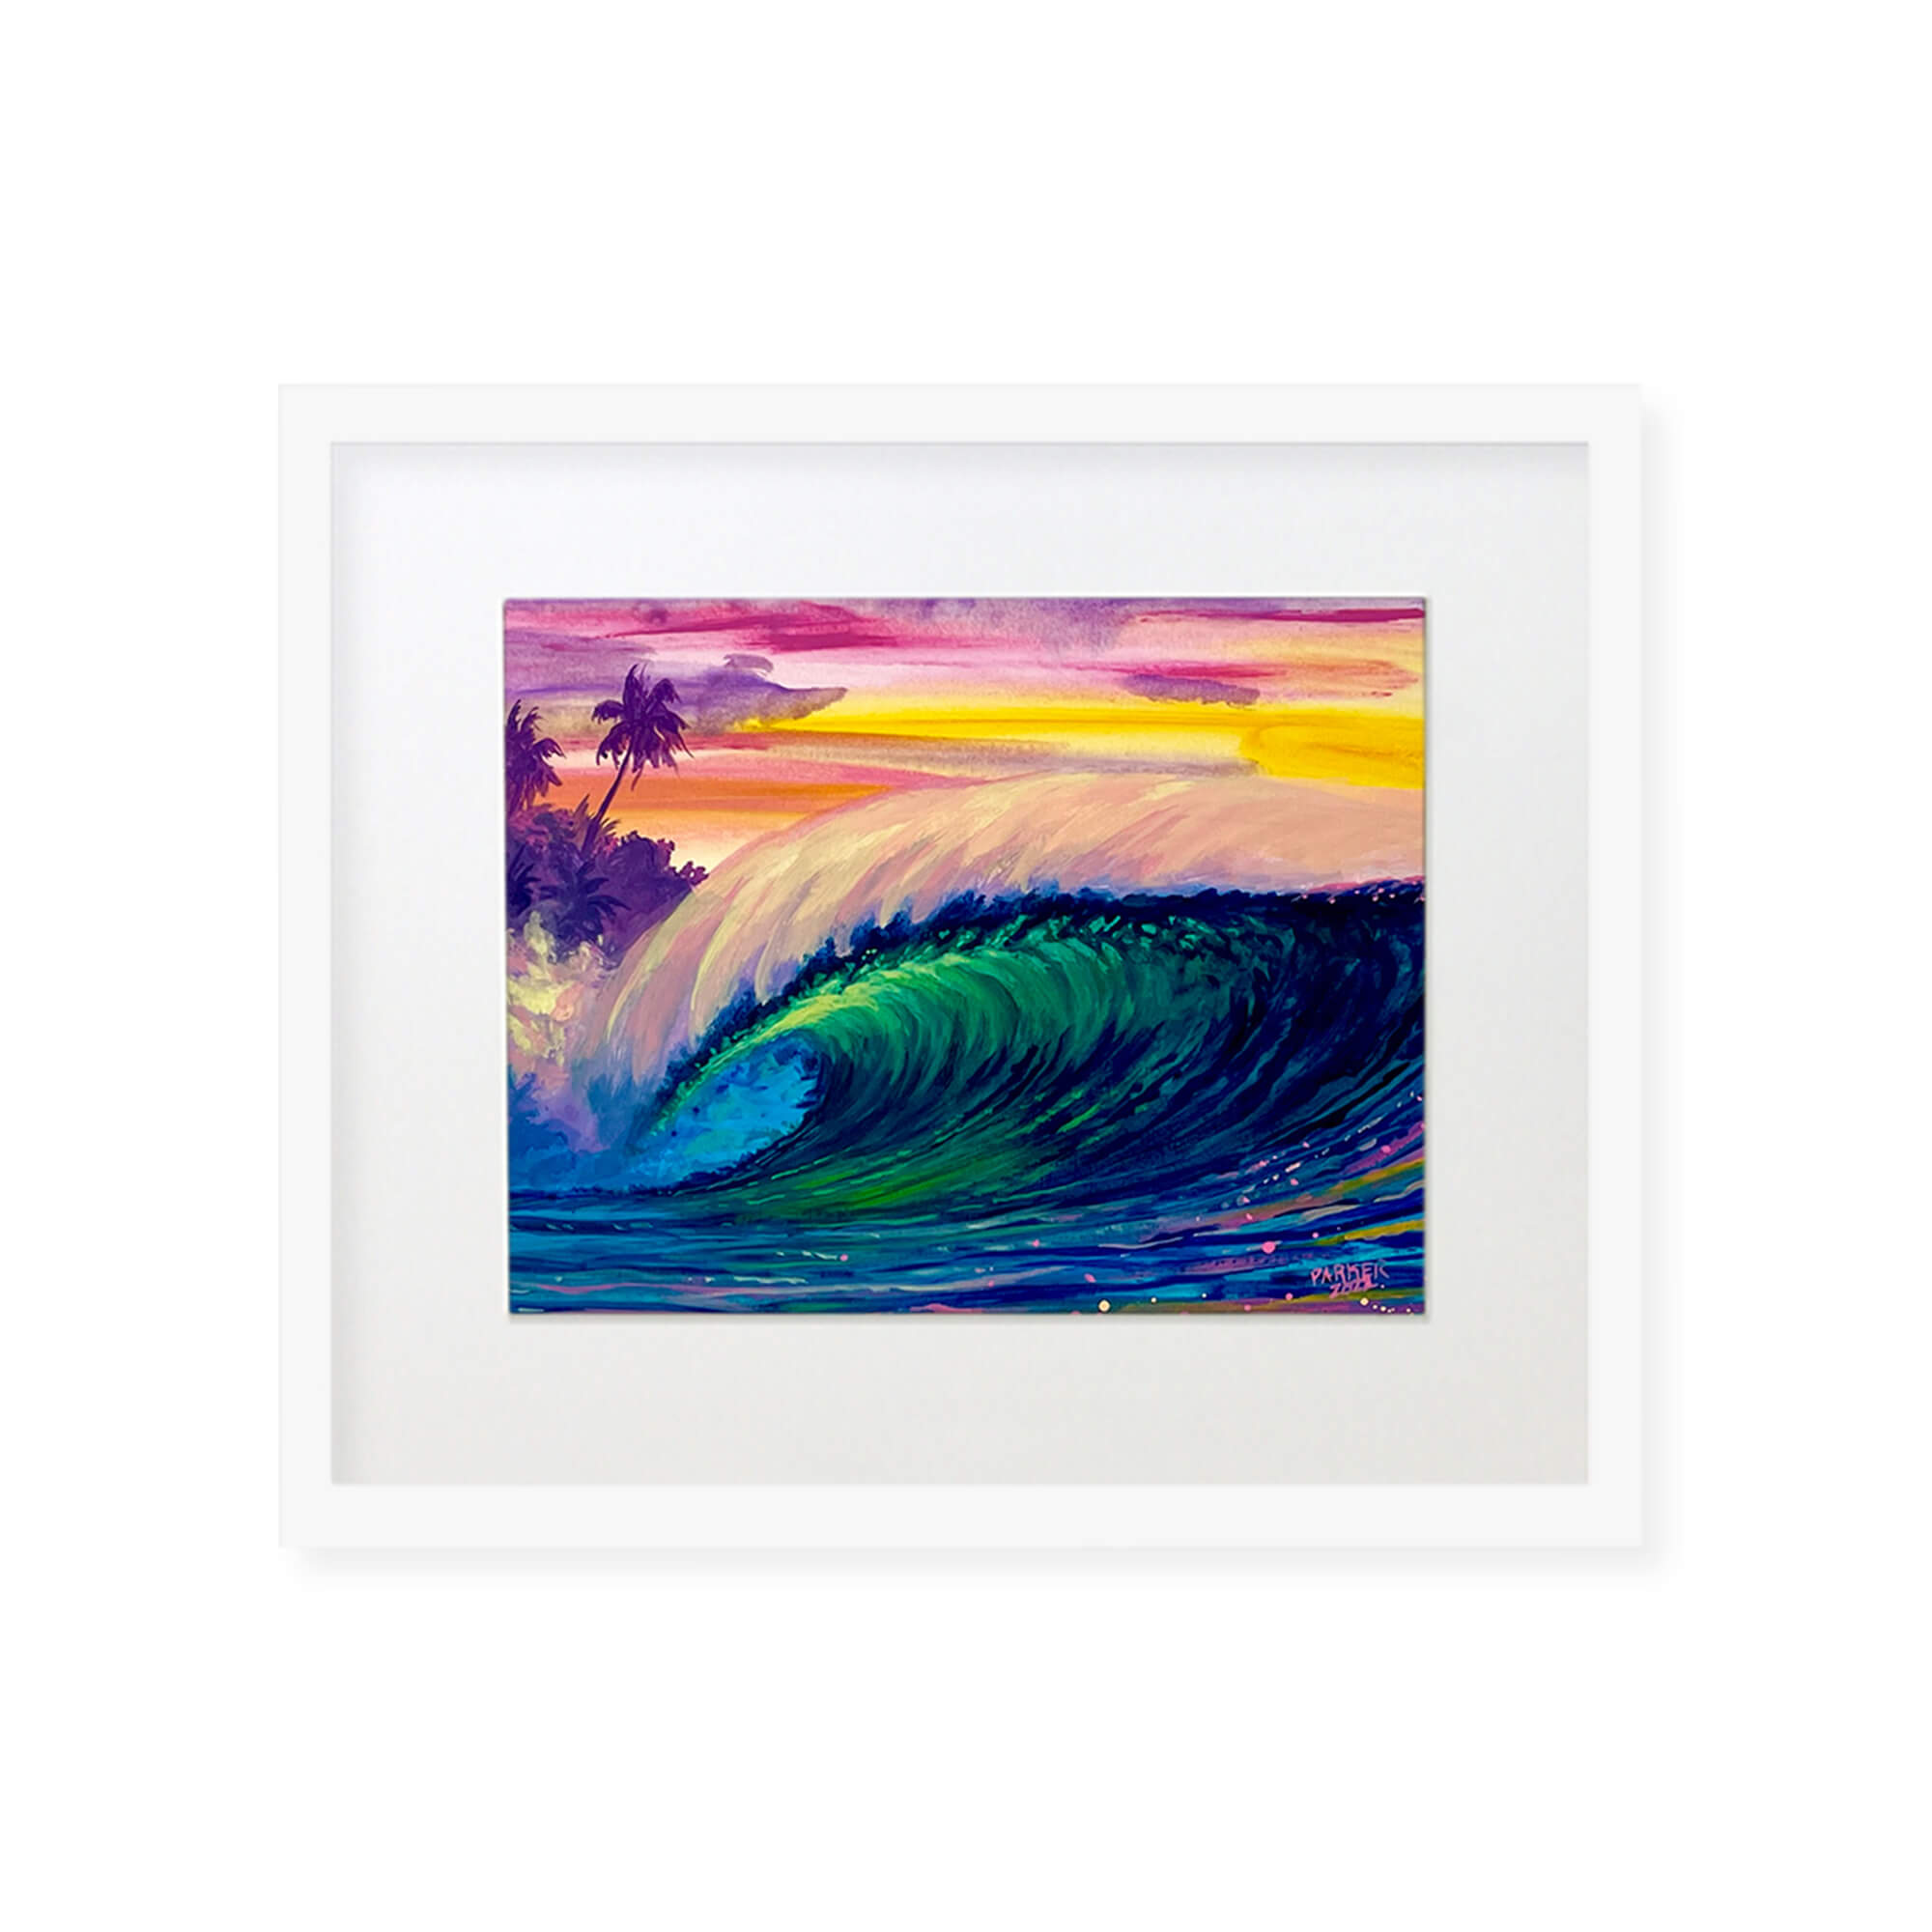 A framed original painting featuring a large multi-hued crashing wave and vibrant colorful sky by Maui artist Patrick Parker